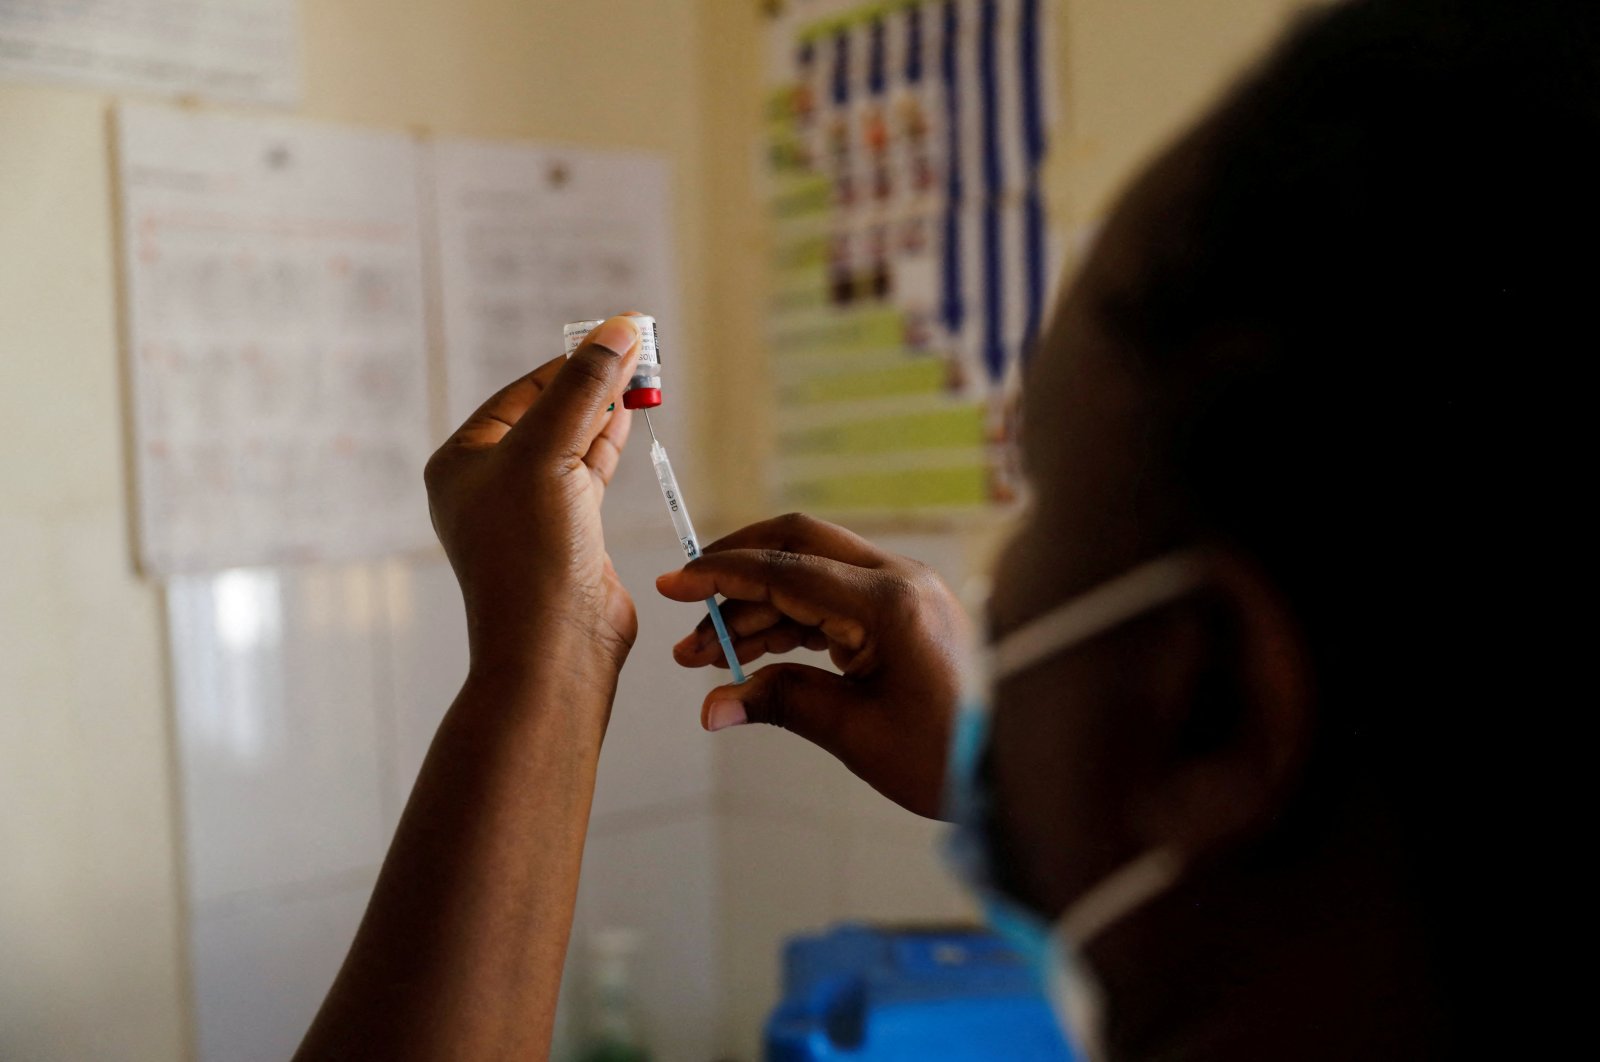 A nurse fills a syringe with a malaria vaccine before administering it to an infant at the Lumumba Sub-County hospital in Kisumu, Kenya, July 1, 2022. (Reuters Photo)